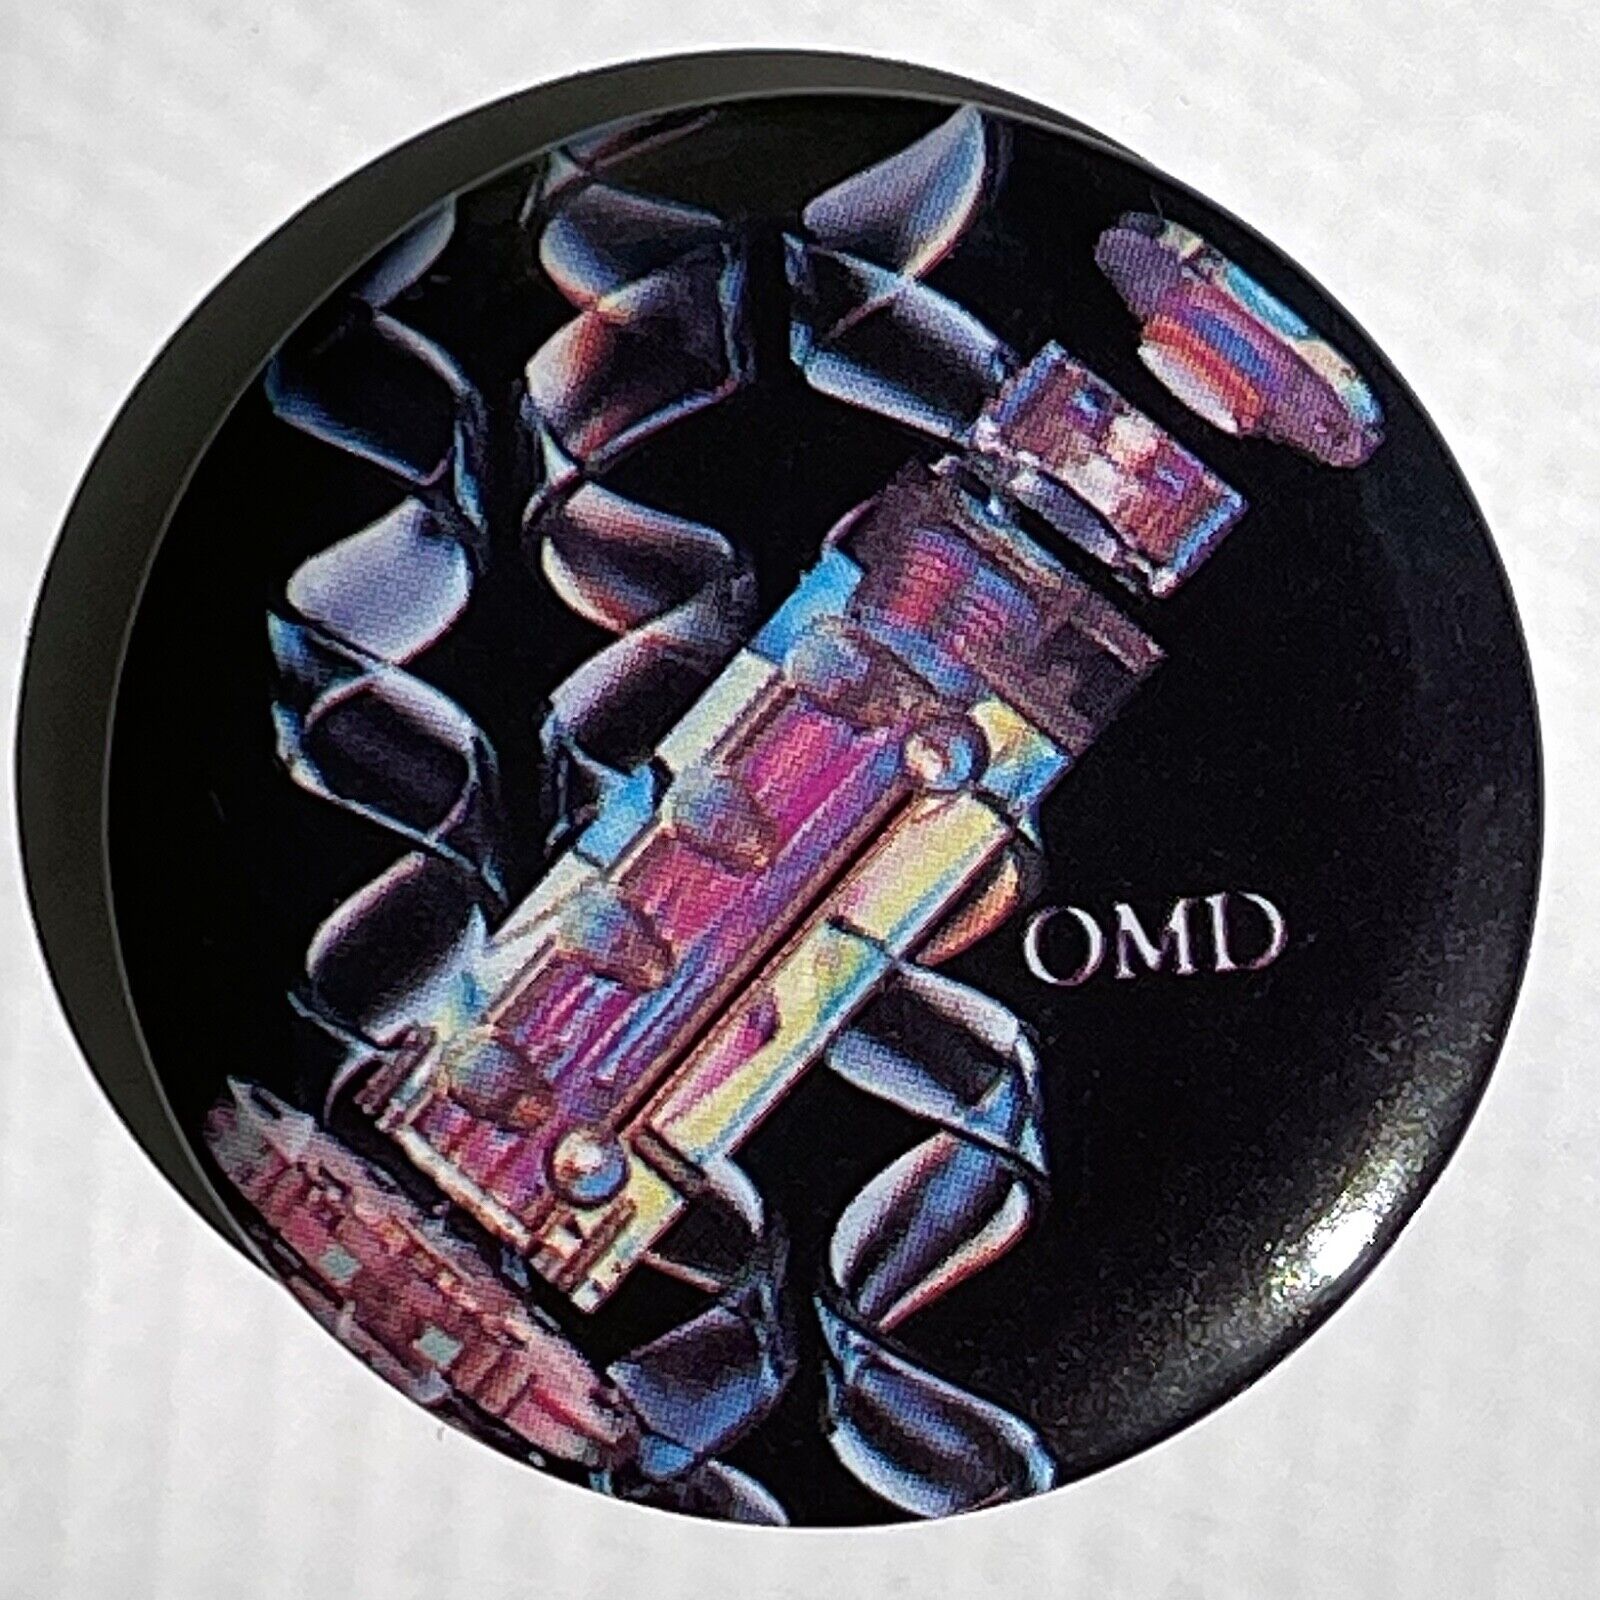 Vtg ORCHESTRAL MANOEUVRES IN THE DARK promo button OMD pin Genetic Engineering